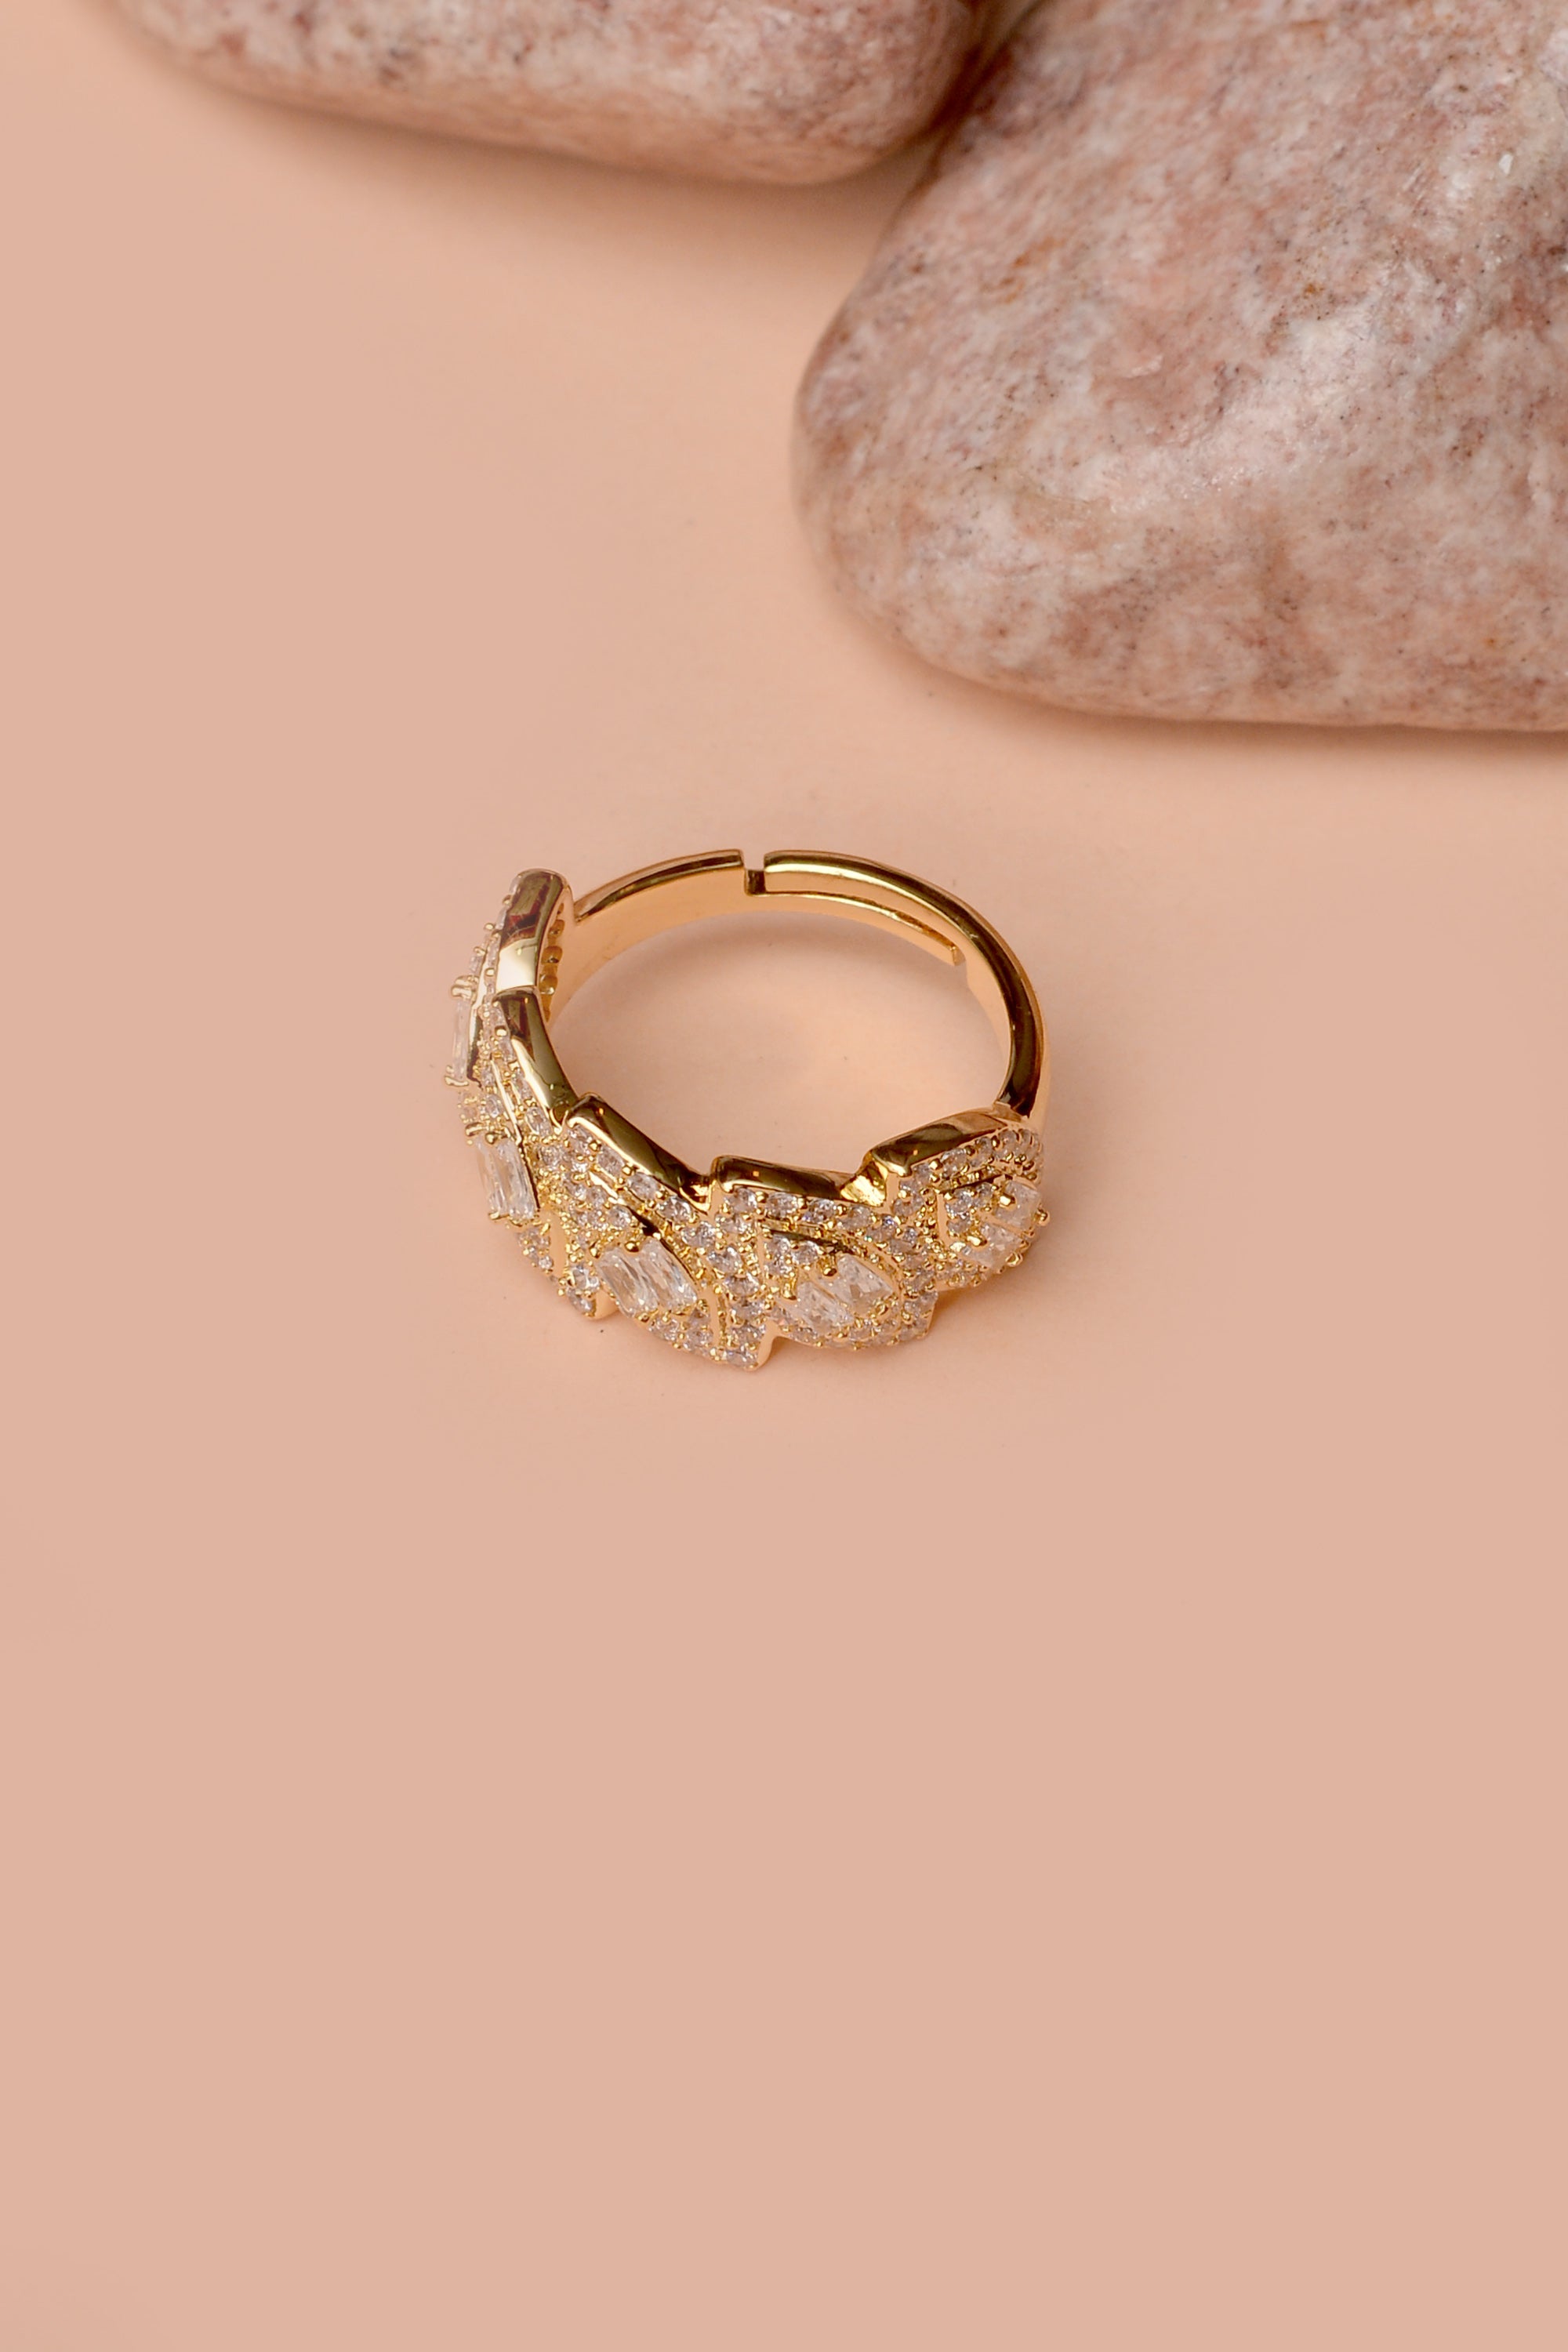 Adjustable Size Party Wear Golden Ring